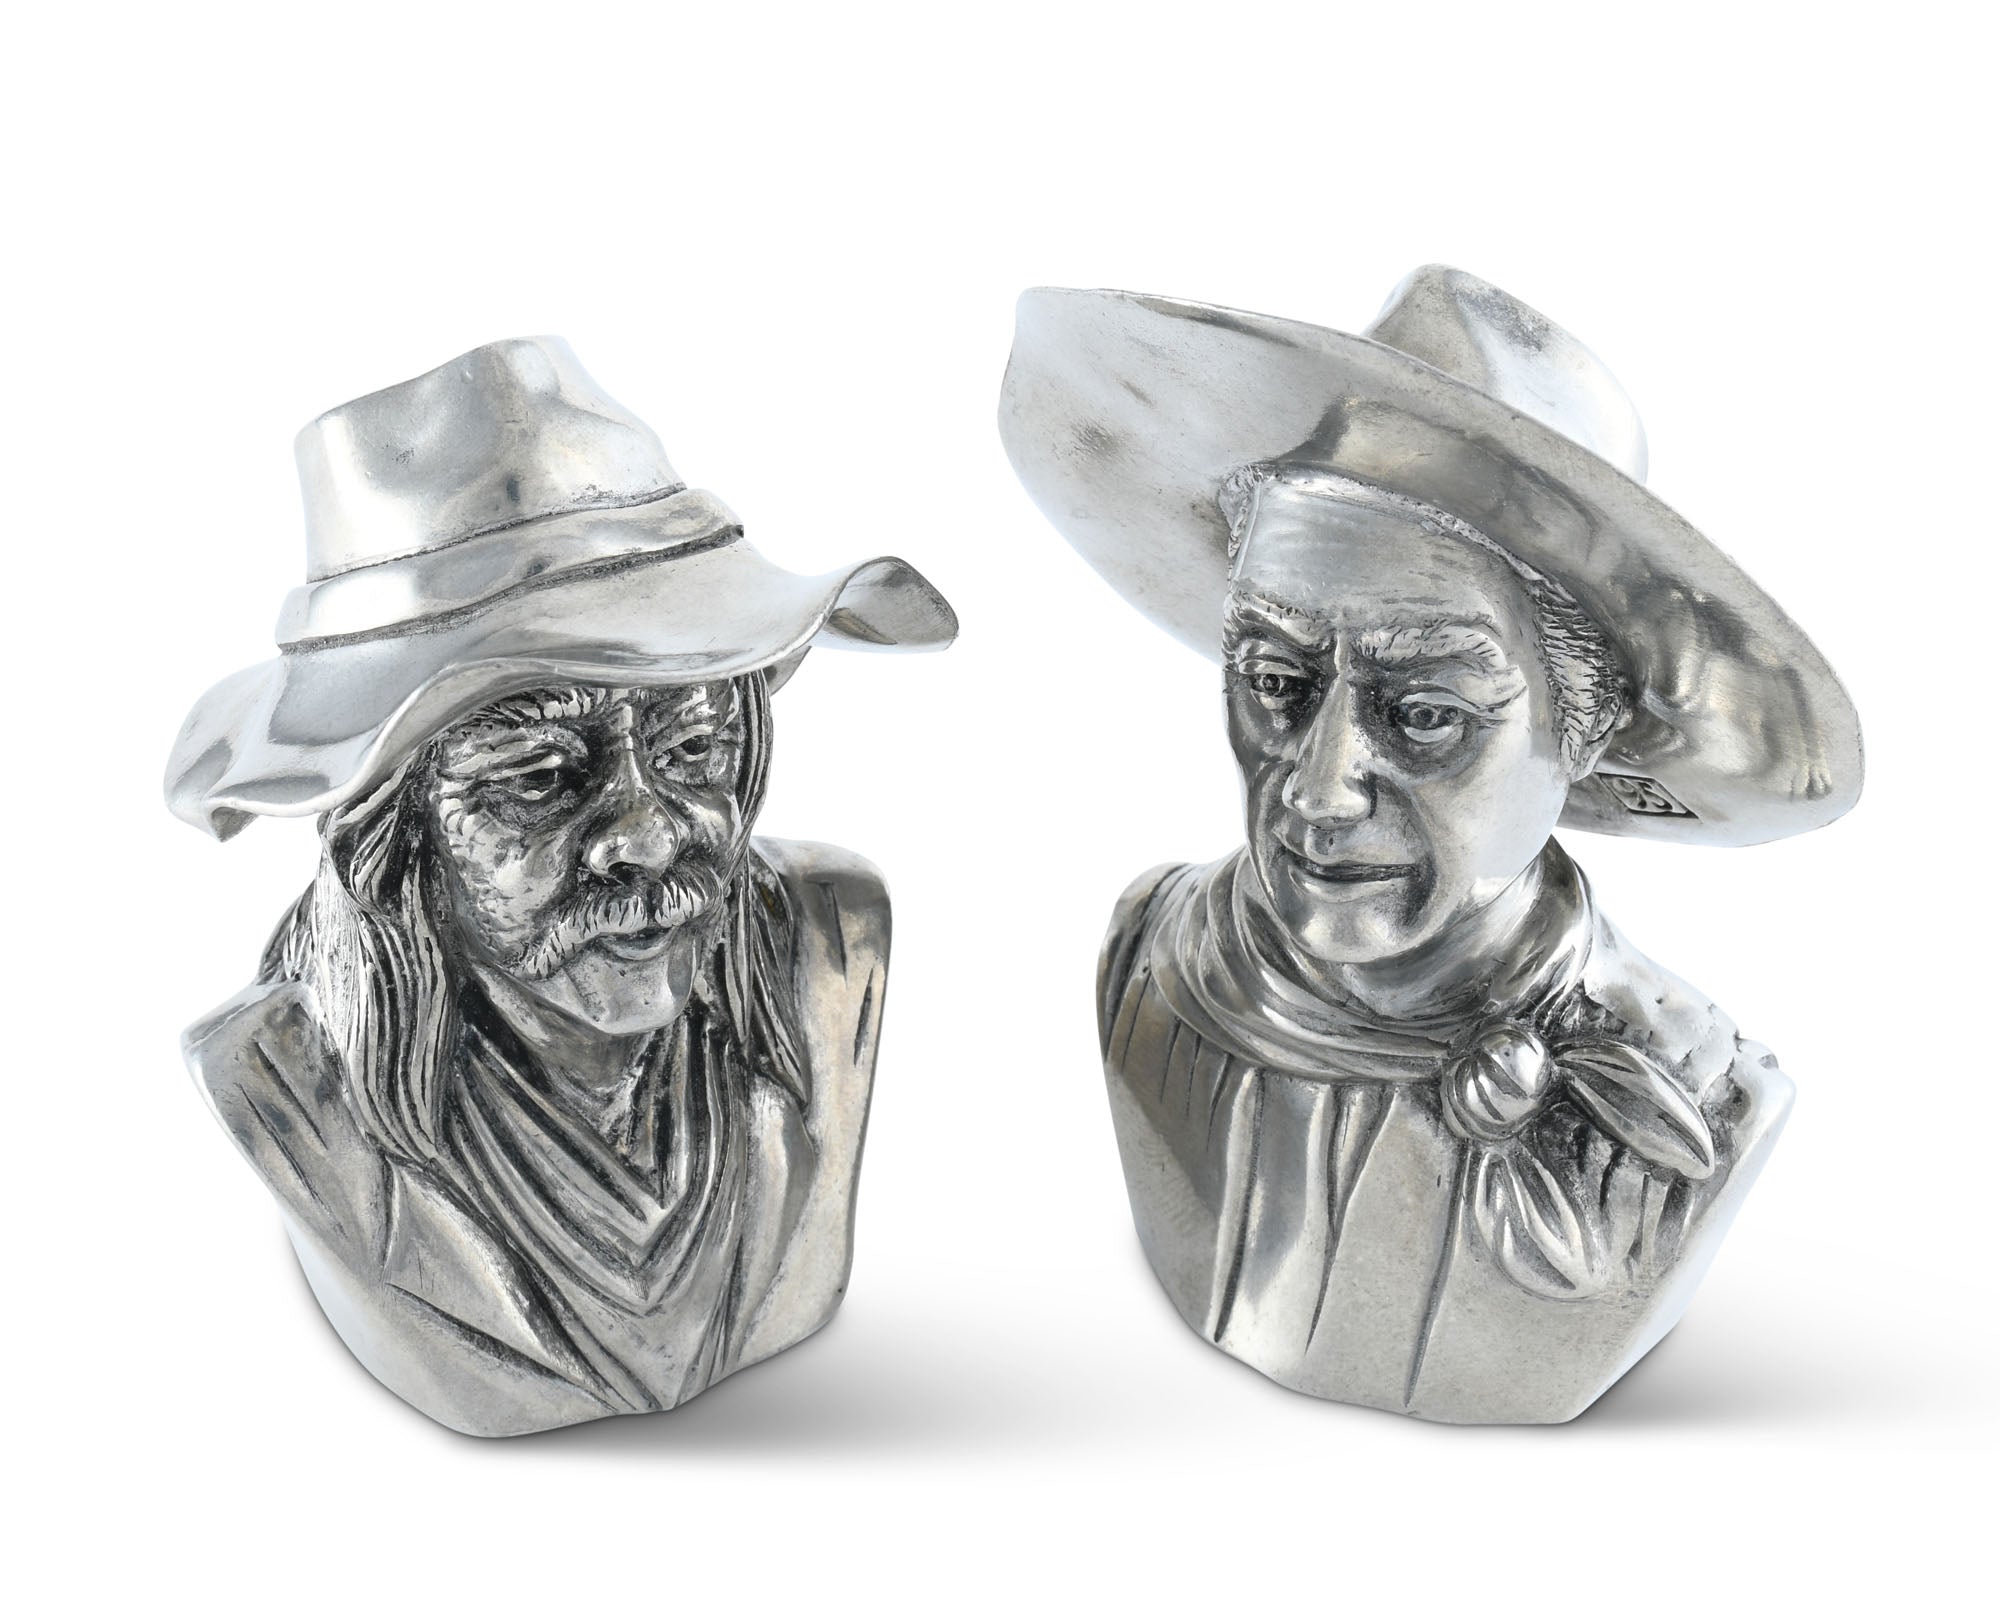 Vagabond House The Bandit and the Ranger Salt and Pepper Set Product Image